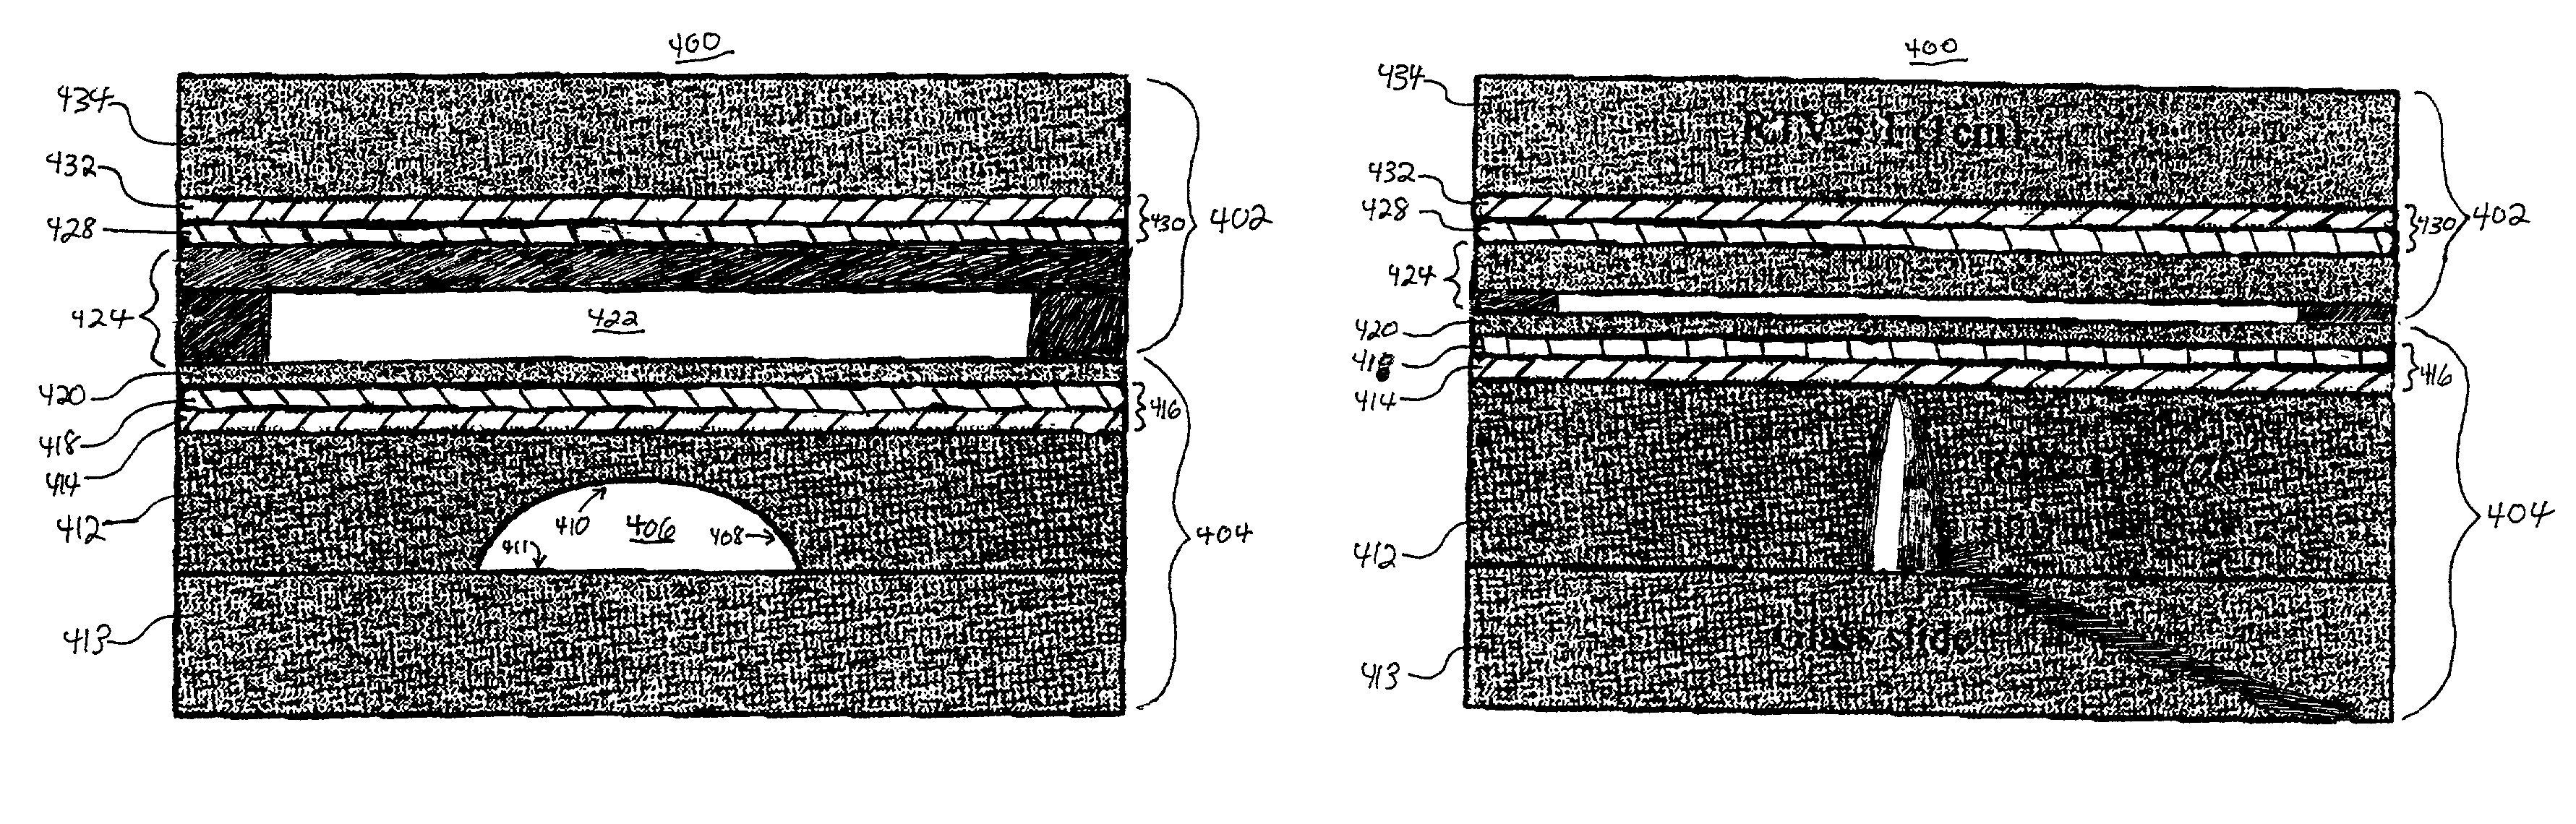 Electrostatic valves for microfluidic devices